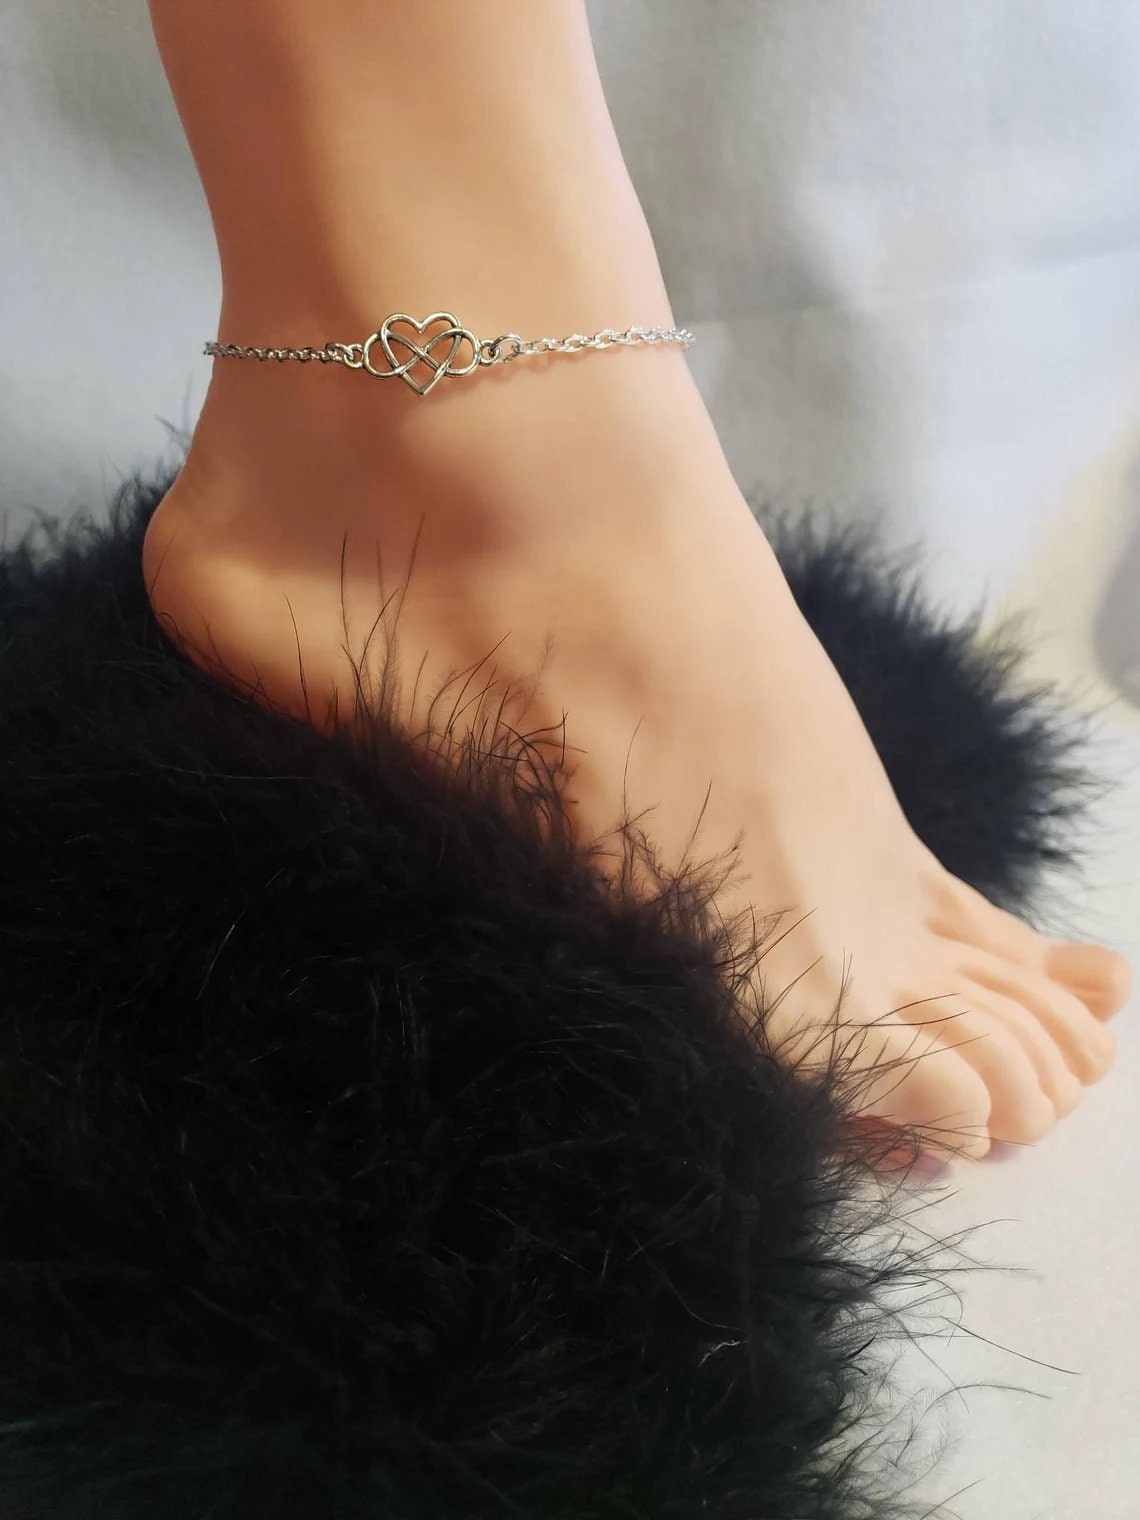 Hotwife Anklet Jewelry To Enjoy The Advance Beauty by Vixen and Stage -  Issuu